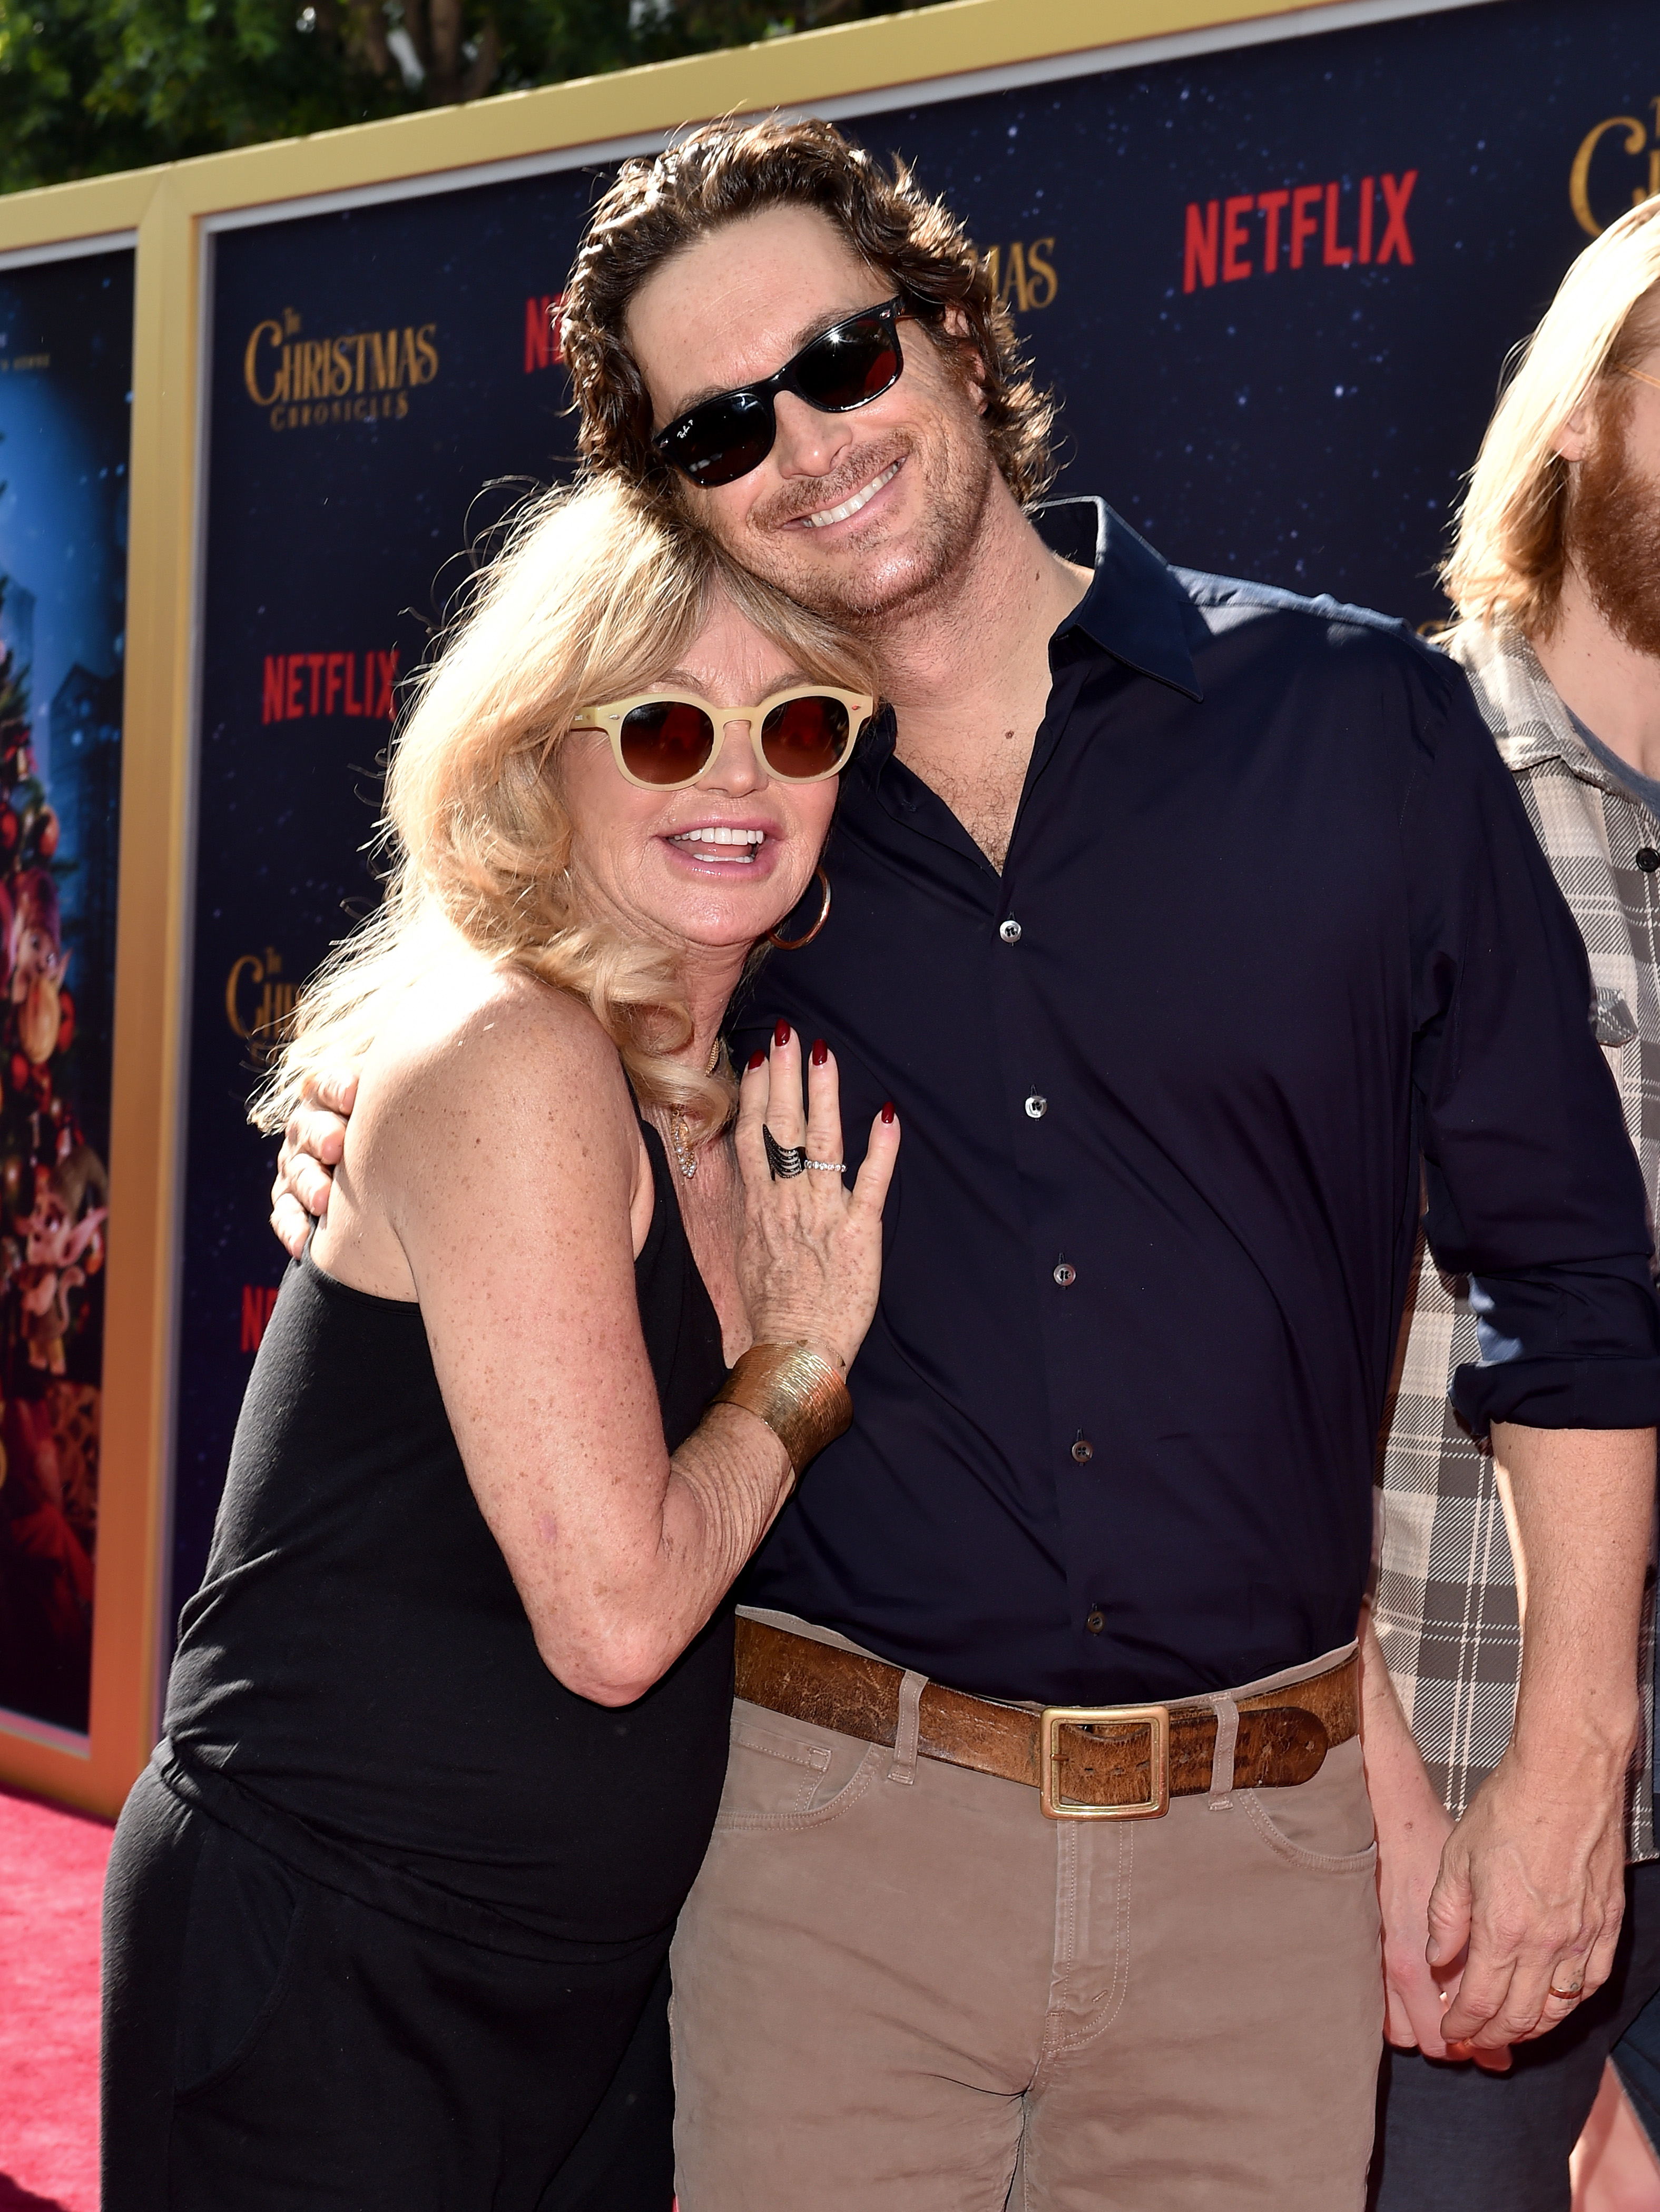 Goldie Hawn and Oliver Hudson at the premiere of "The Christmas Chronicles," 2018 | Source: Getty Images